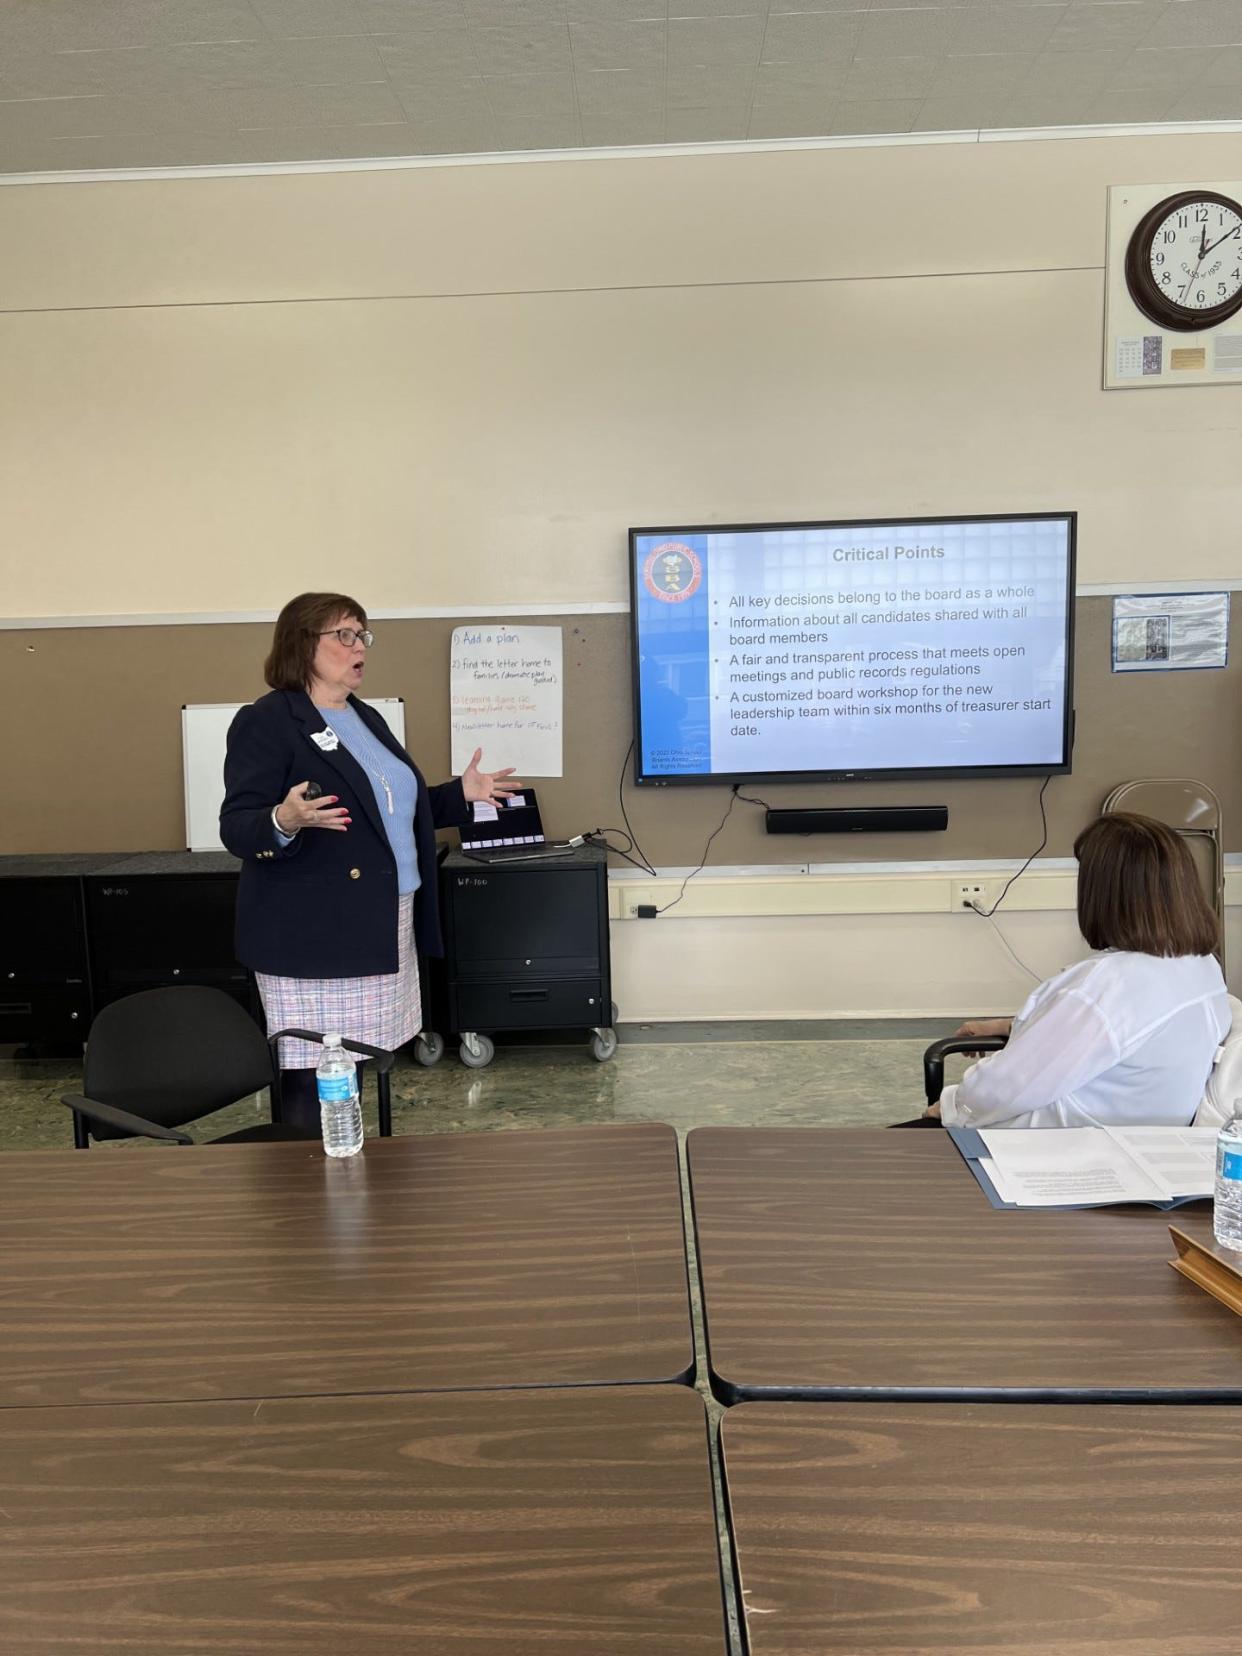 Teri Morgan of the Ohio School Boards Association gives a presentation to the Ravenna Board of Education on the selection process the board would go through if the board picks the OSBA to select its next treasurer.